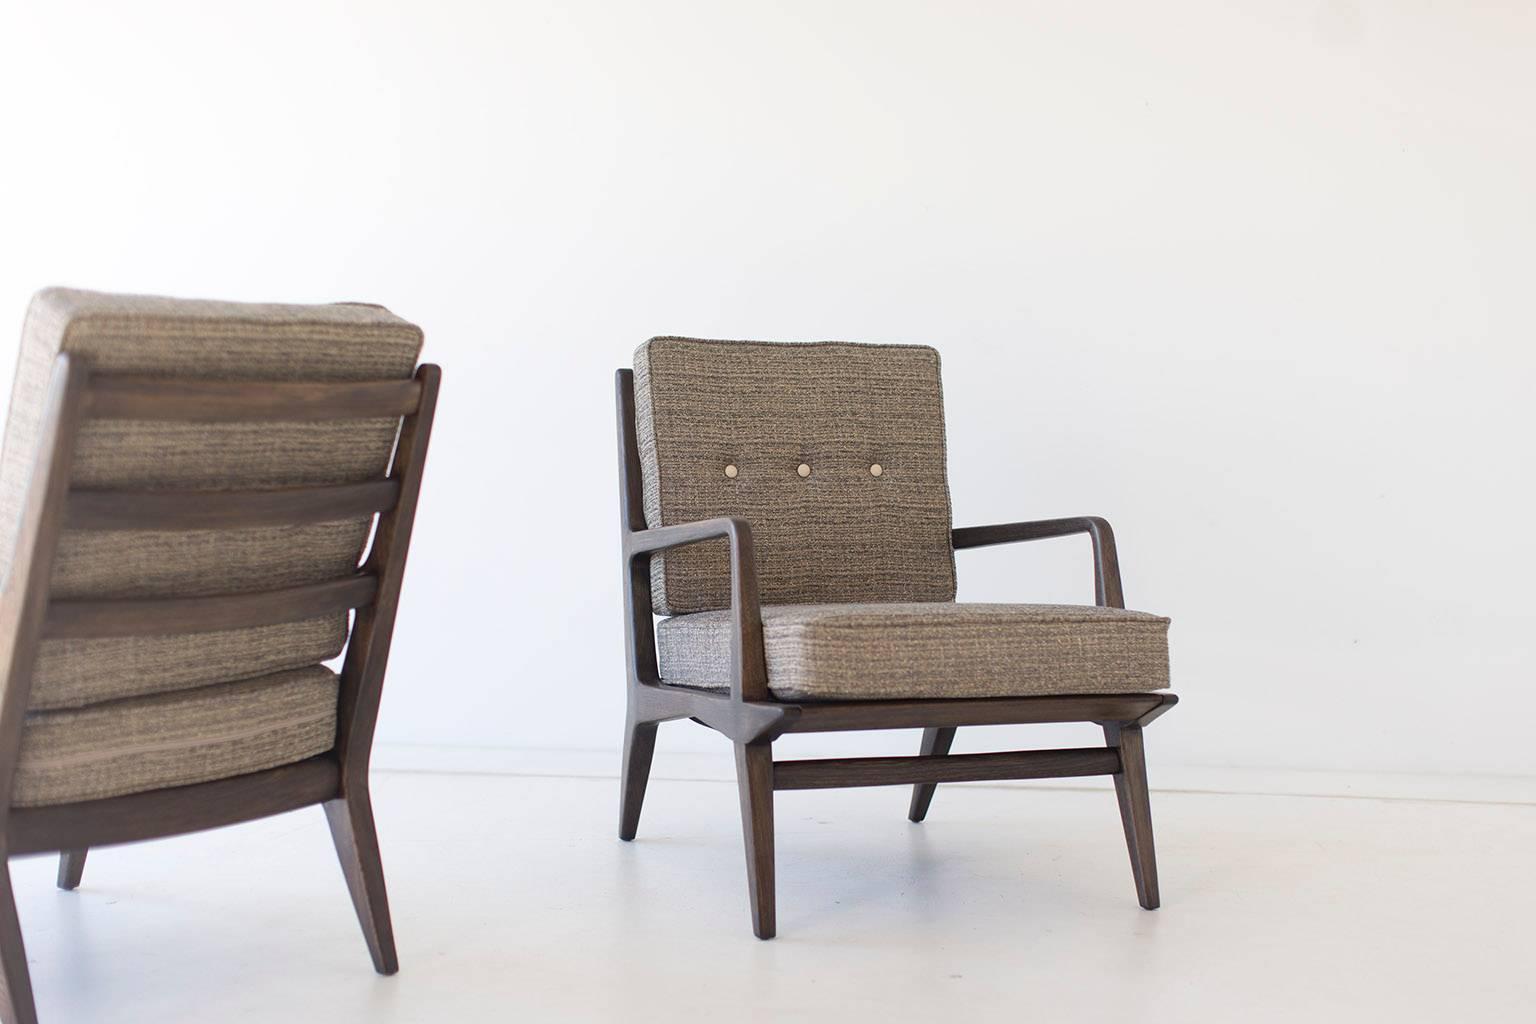 Mid-20th Century Carlo de Carli Lounge Chairs for M. Singer & Sons For Sale